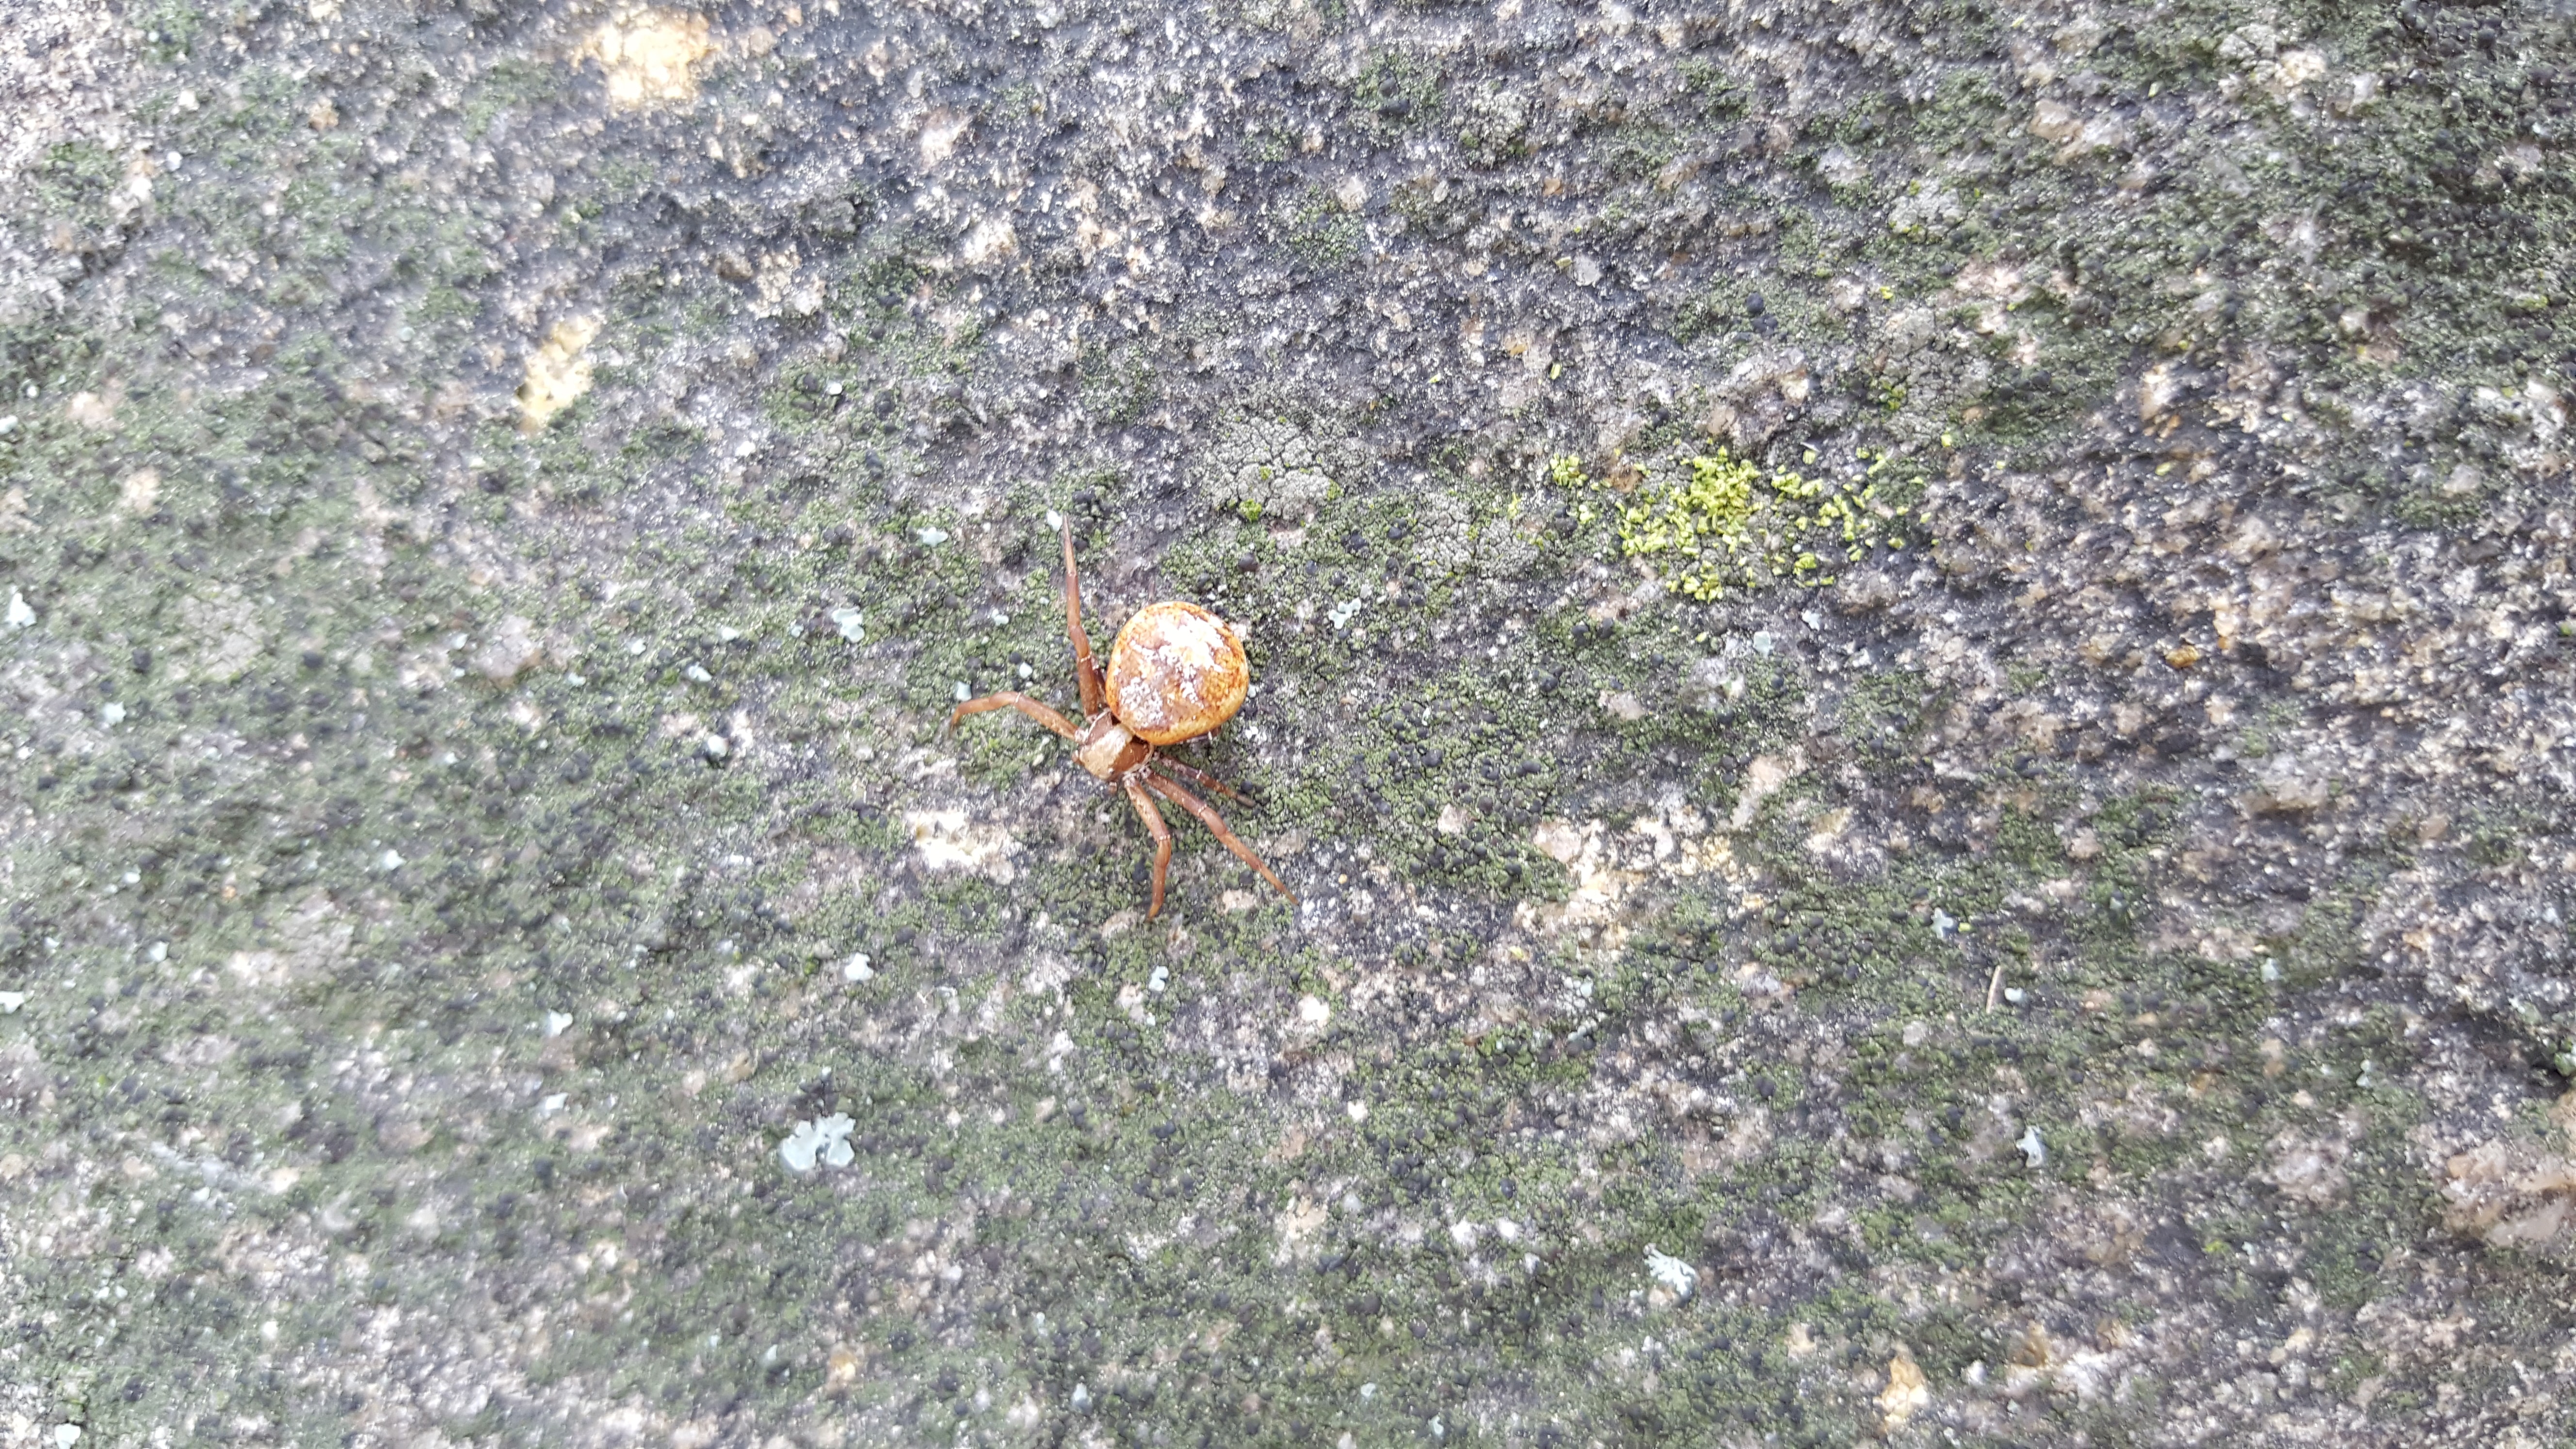 Picture of Xysticus (Ground Crab Spiders) - Dorsal